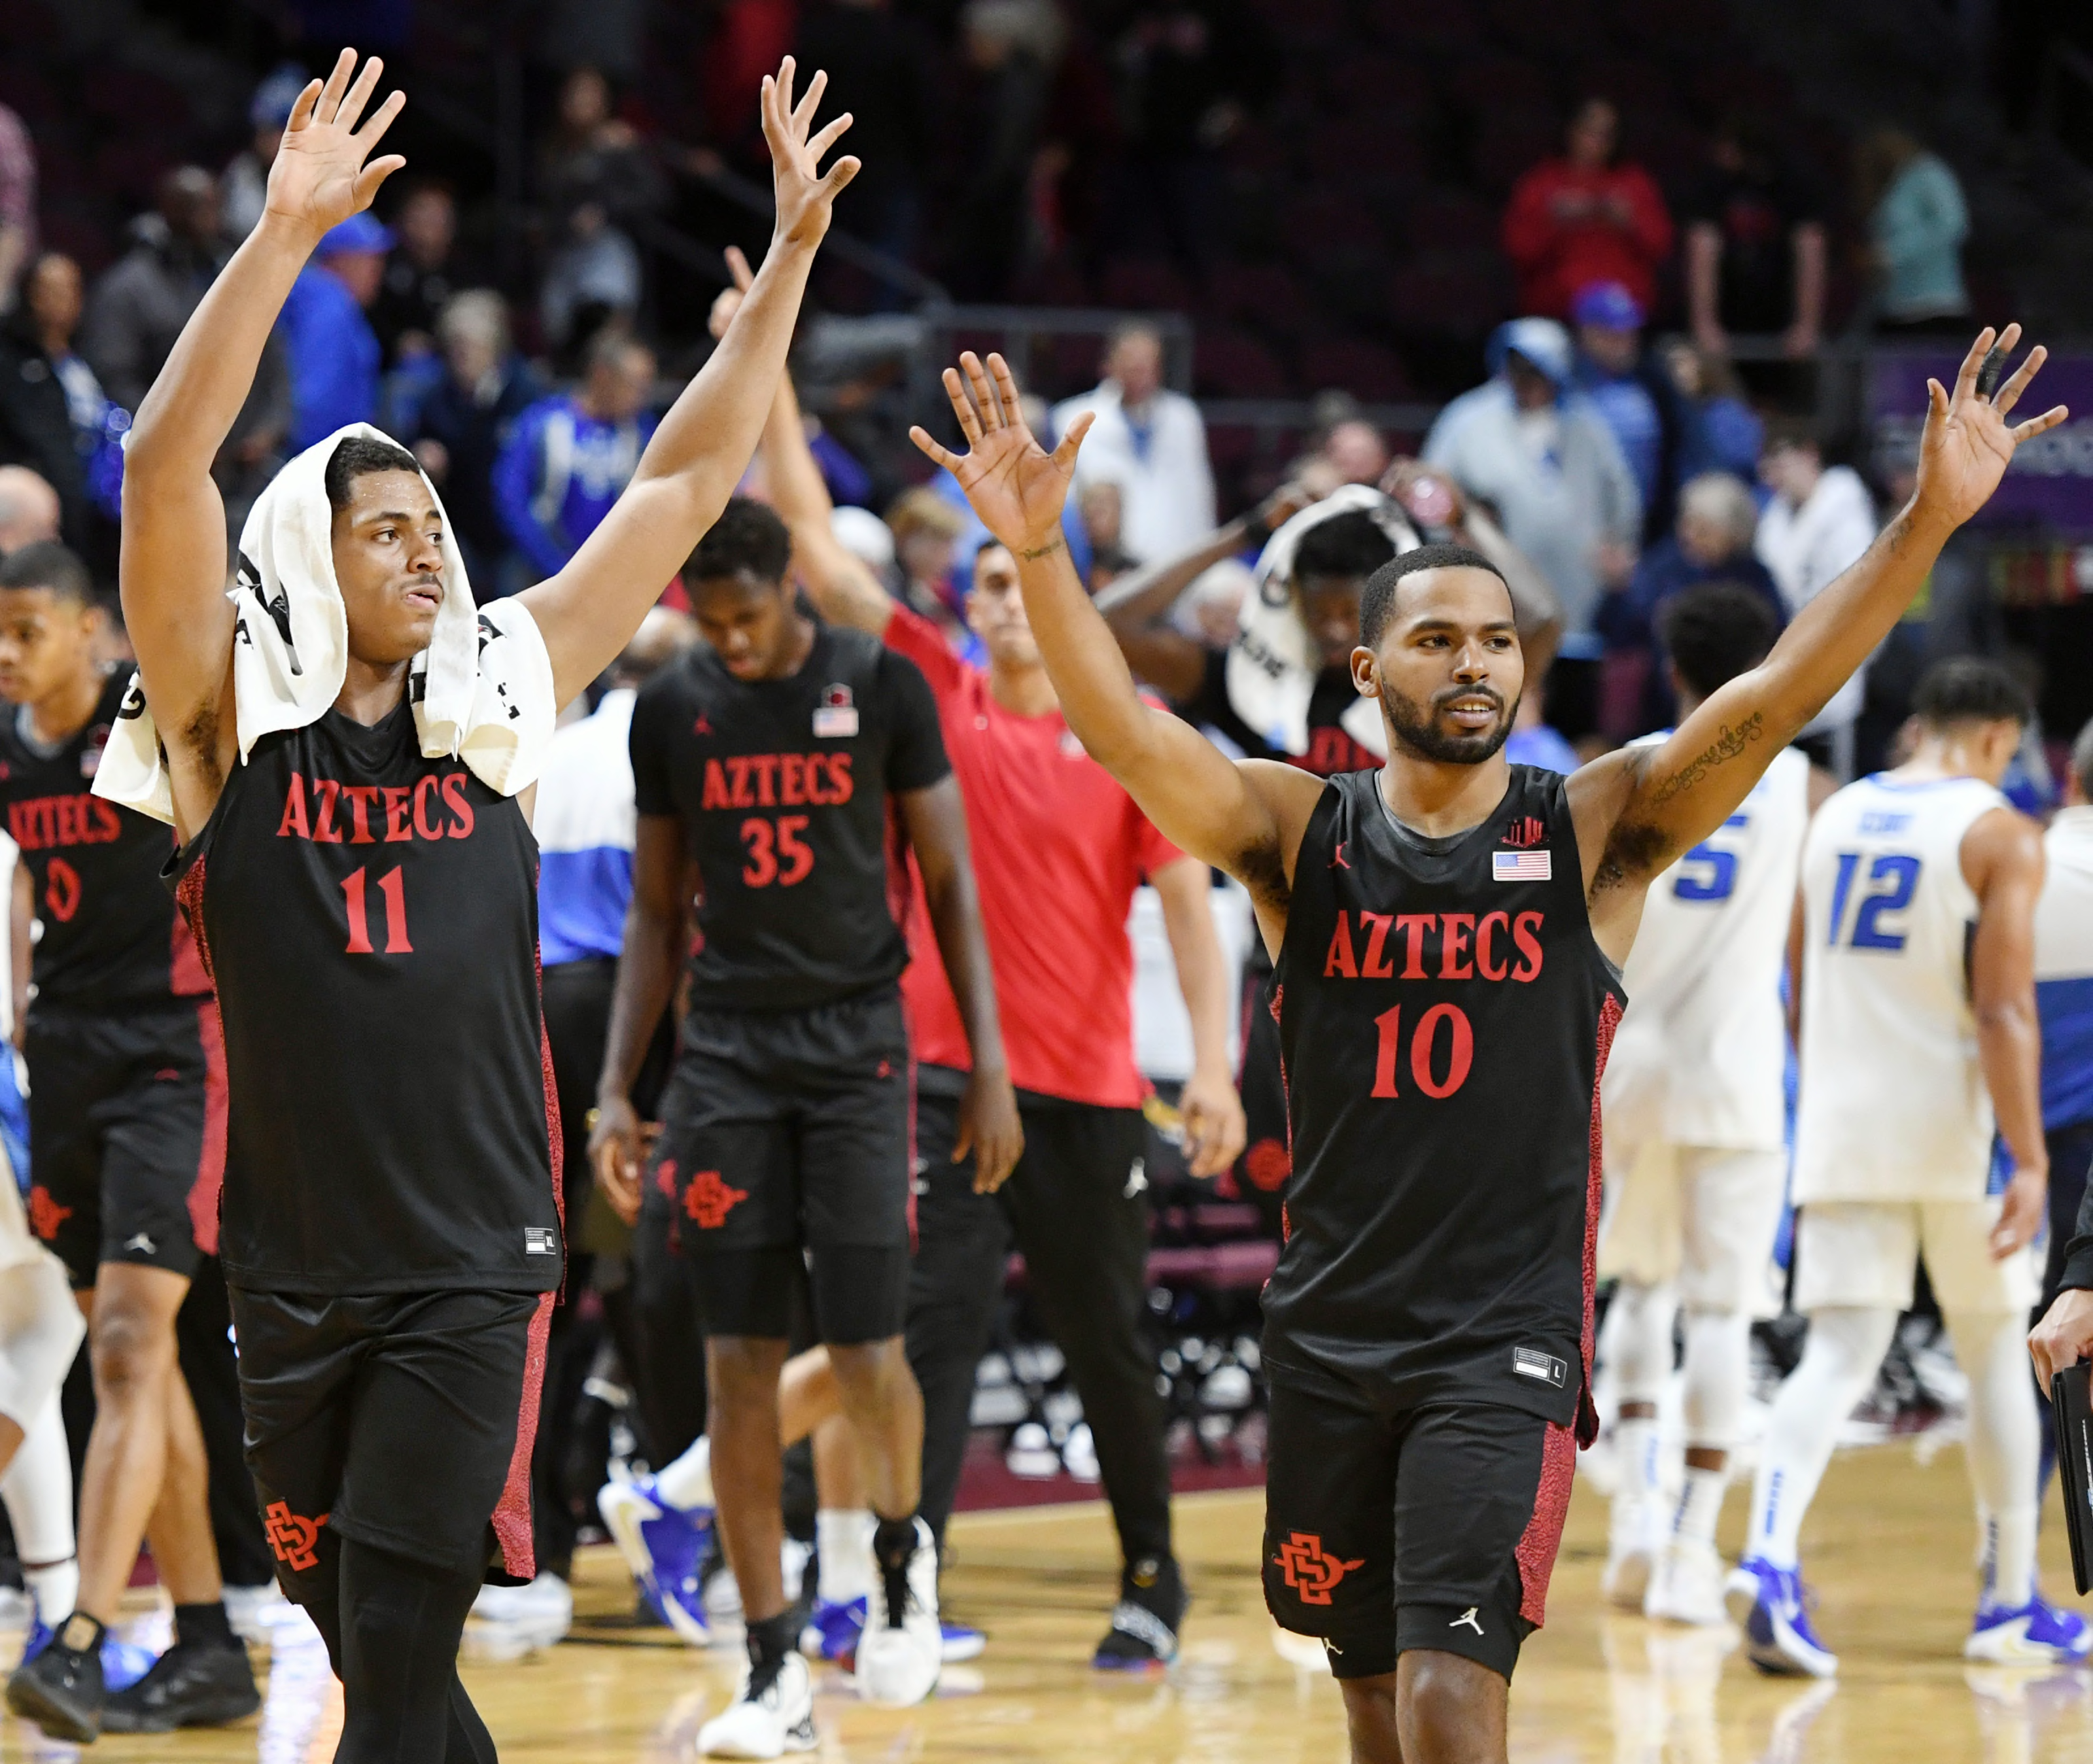 San Diego State Basketball: 5 reasons why Aztecs can win 2019-20 title